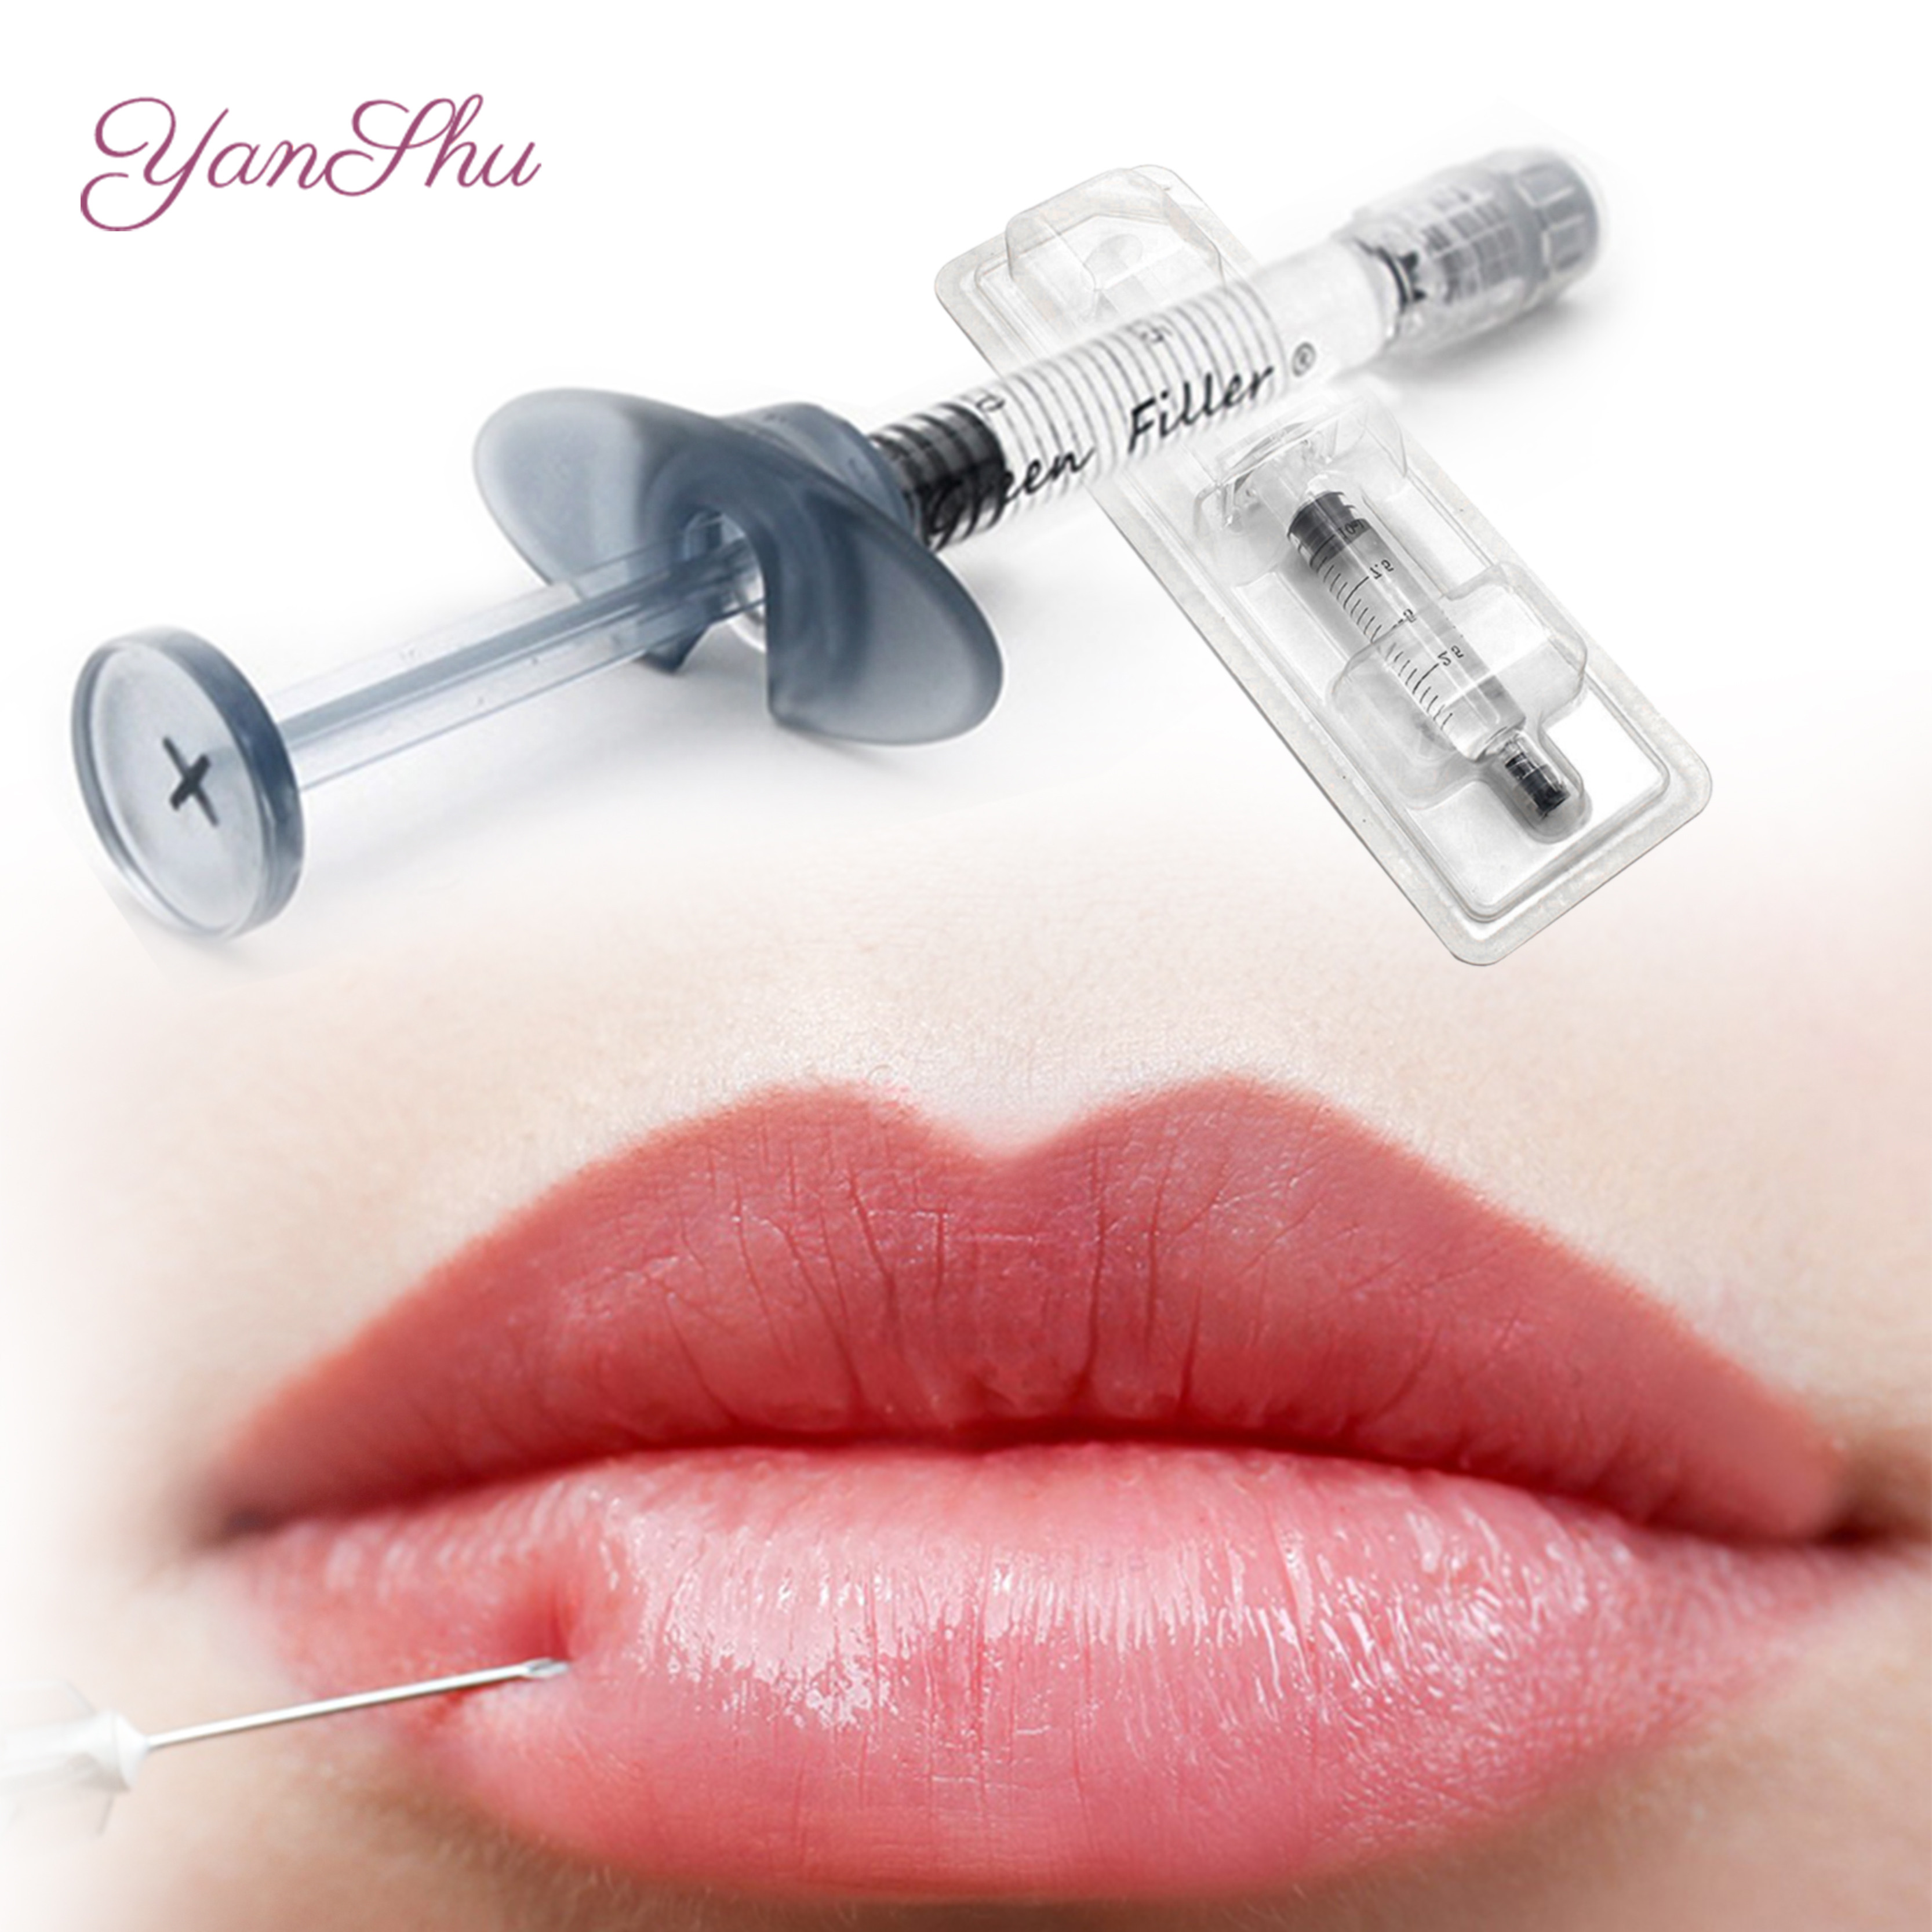 Beauty Salon Injections Pmma Dermal Filler Permanent For Lip Small Order Welcoming